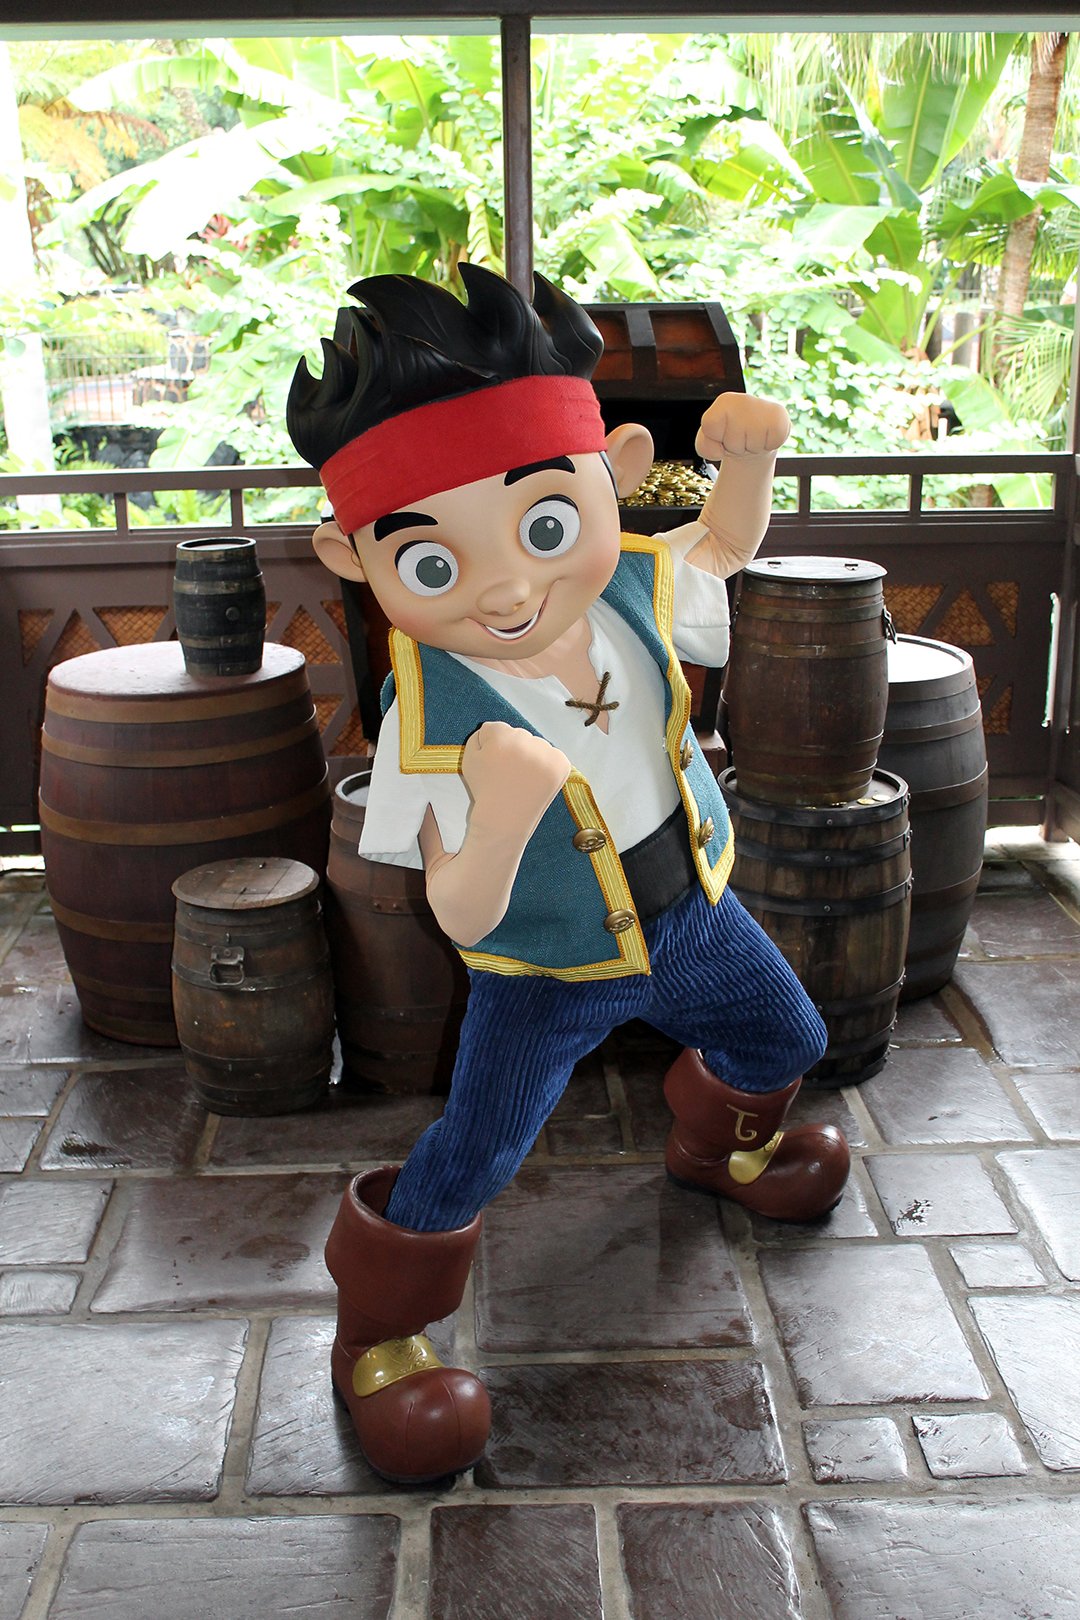 Limited Time Magic Pirates Week Jake and the Neverland Pirates